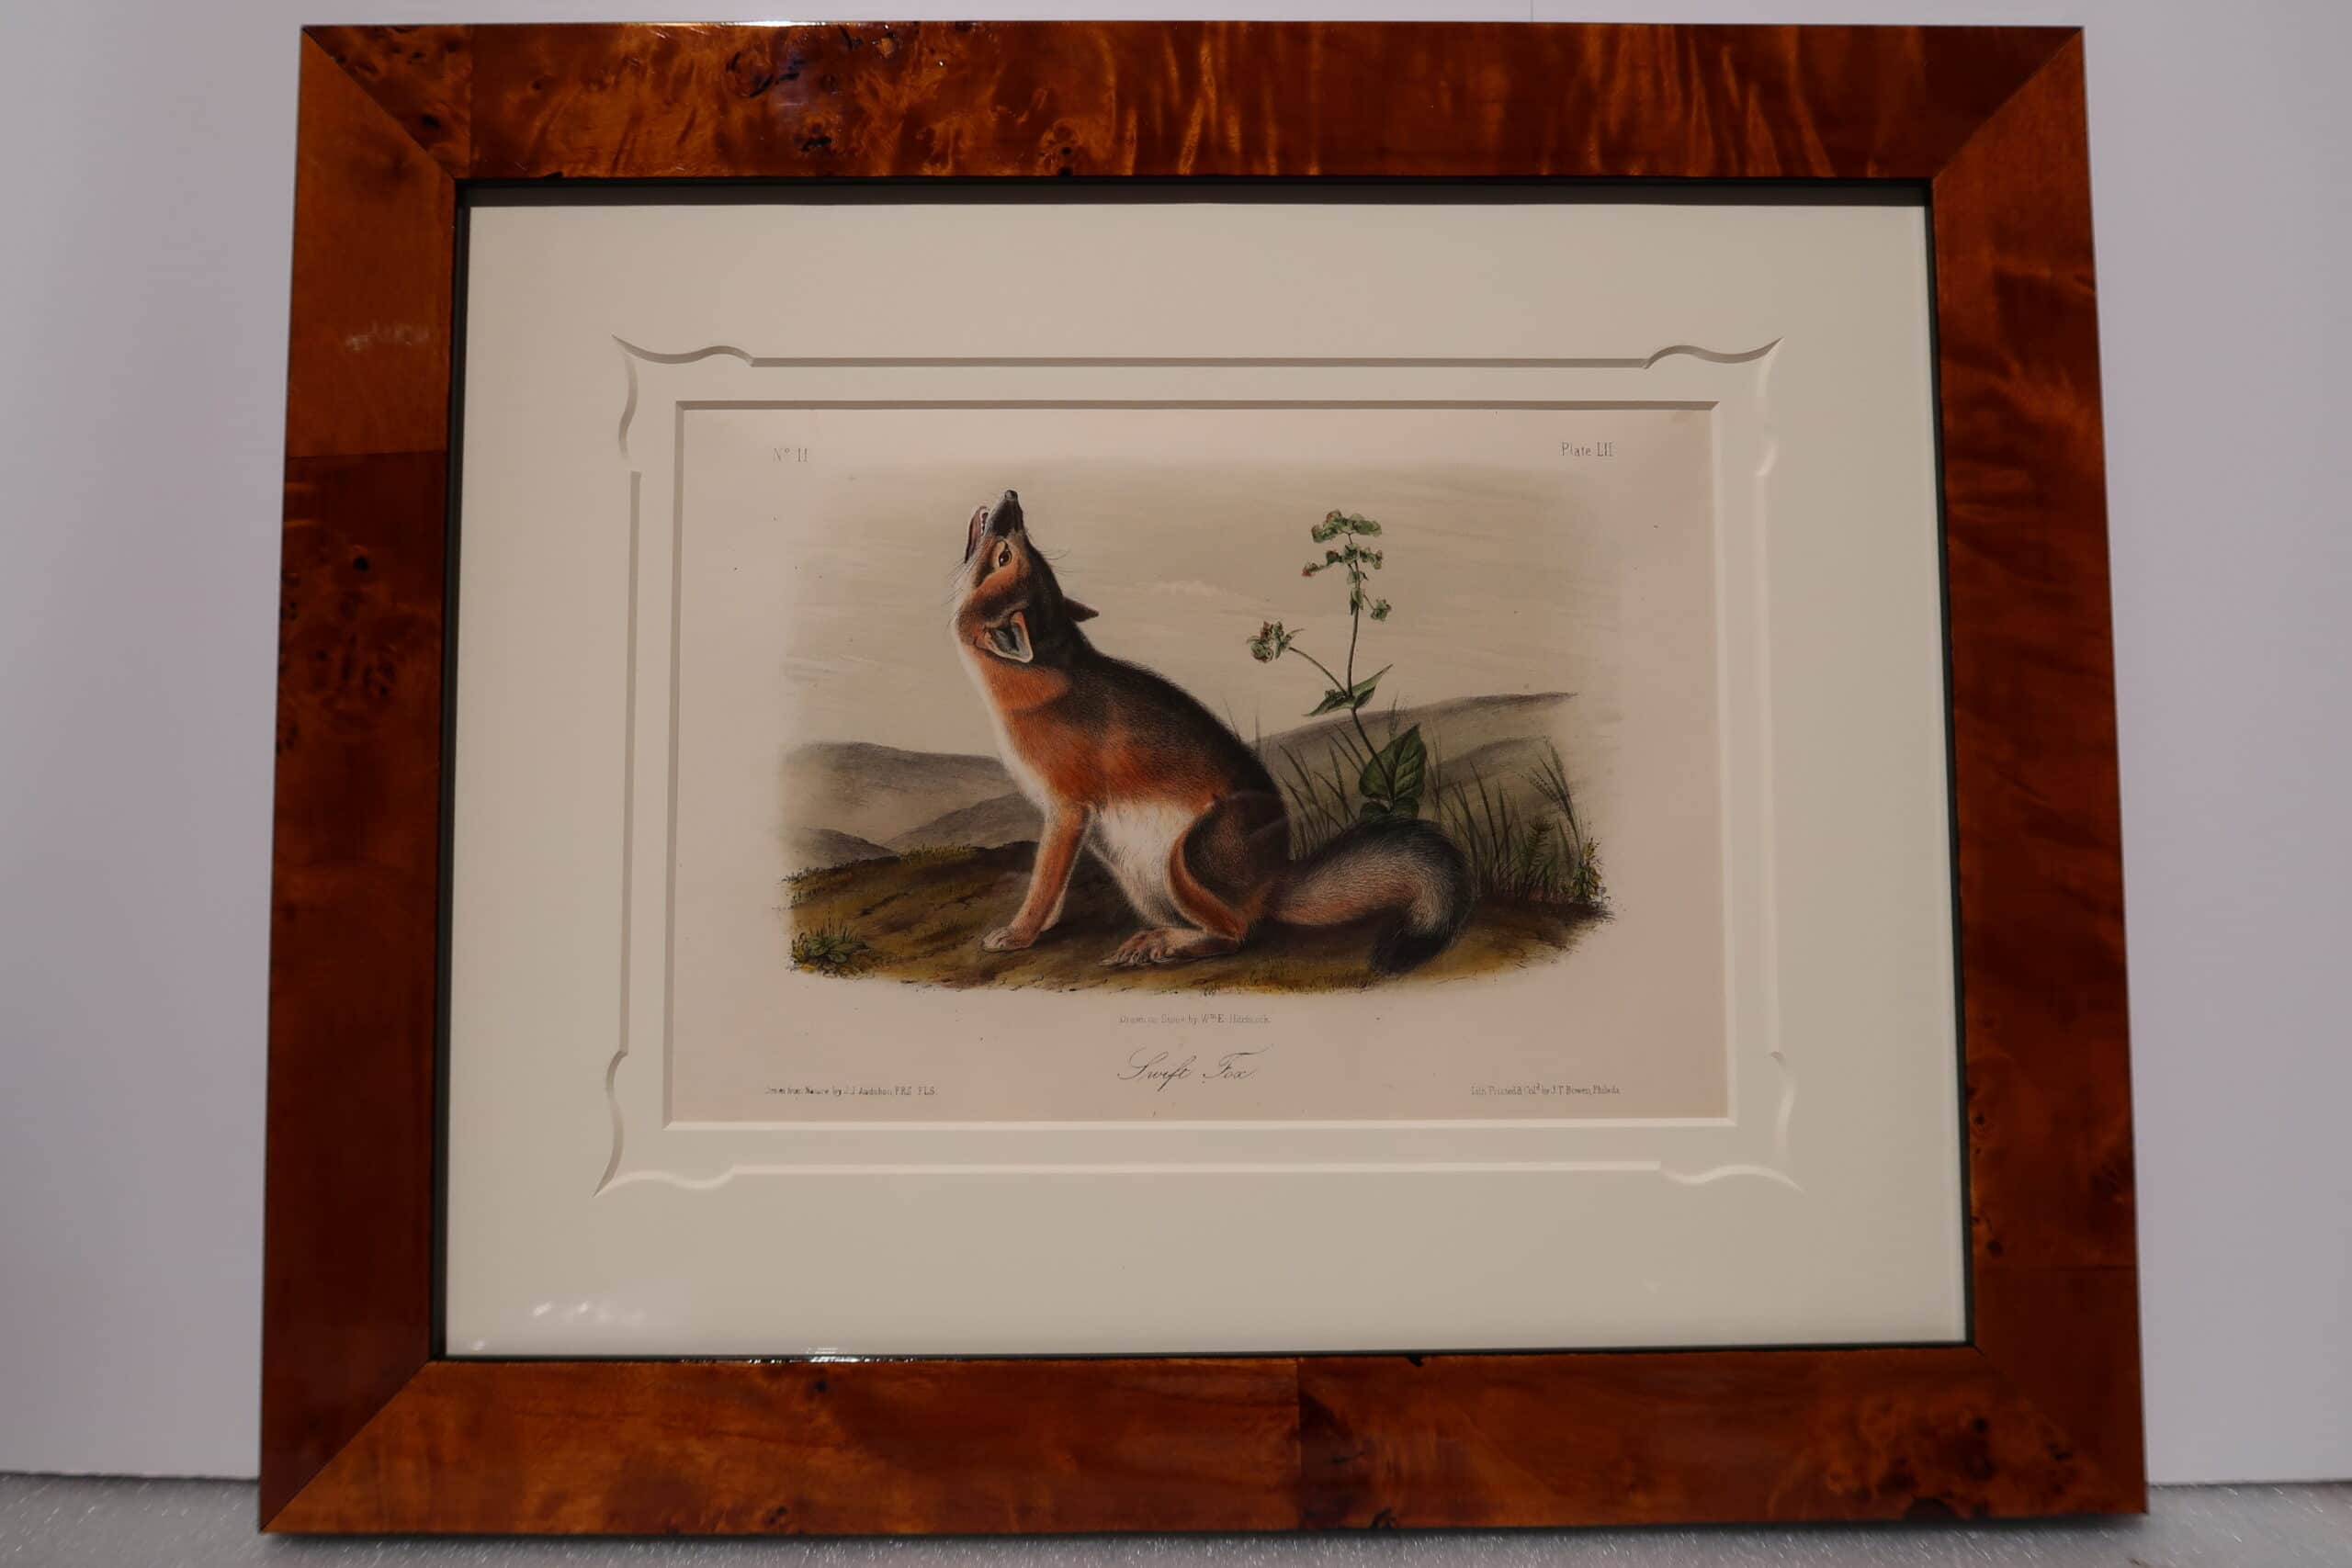 A stunning red fox, or Swift Fox, by John James Audubon. This antique hand-colored lithograph, printed in Philadelphia in1855. It is framed with a exquisite matting, UV glass, in a low profile, modern gloss burlwood frame.